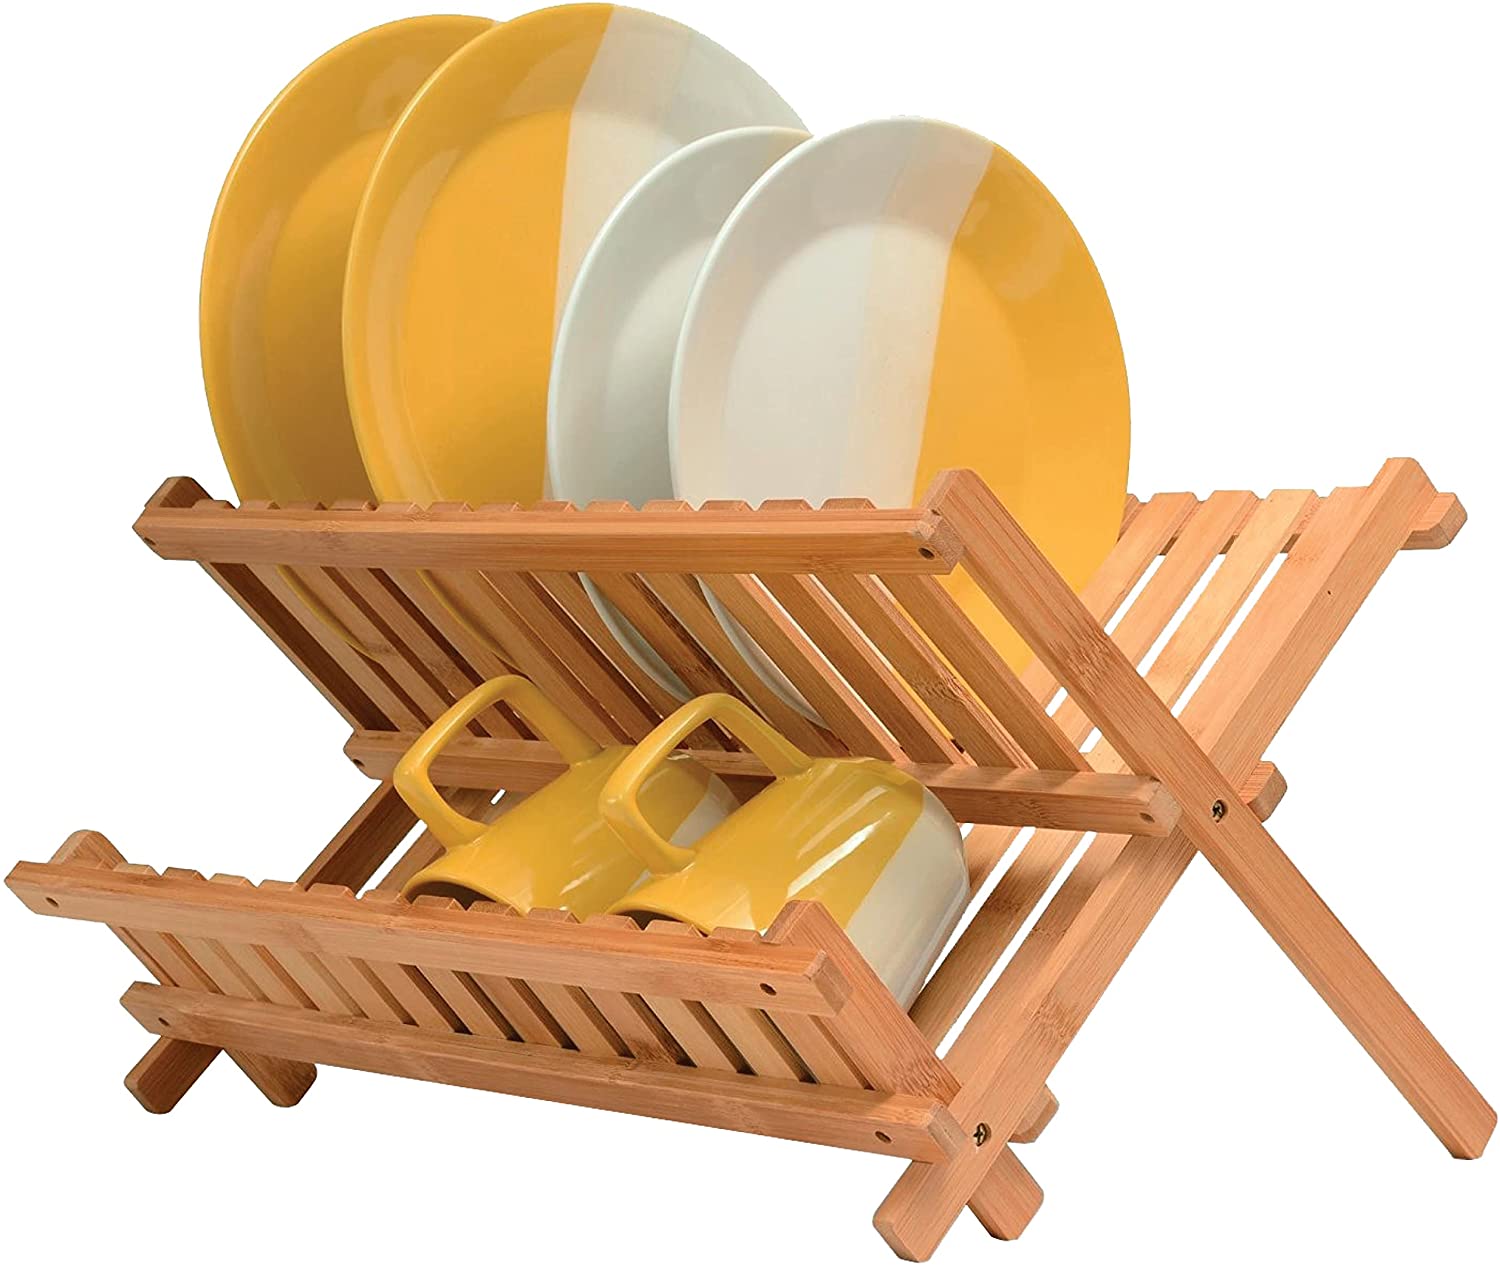 Kitchen drying rack for dishes to save counterspace